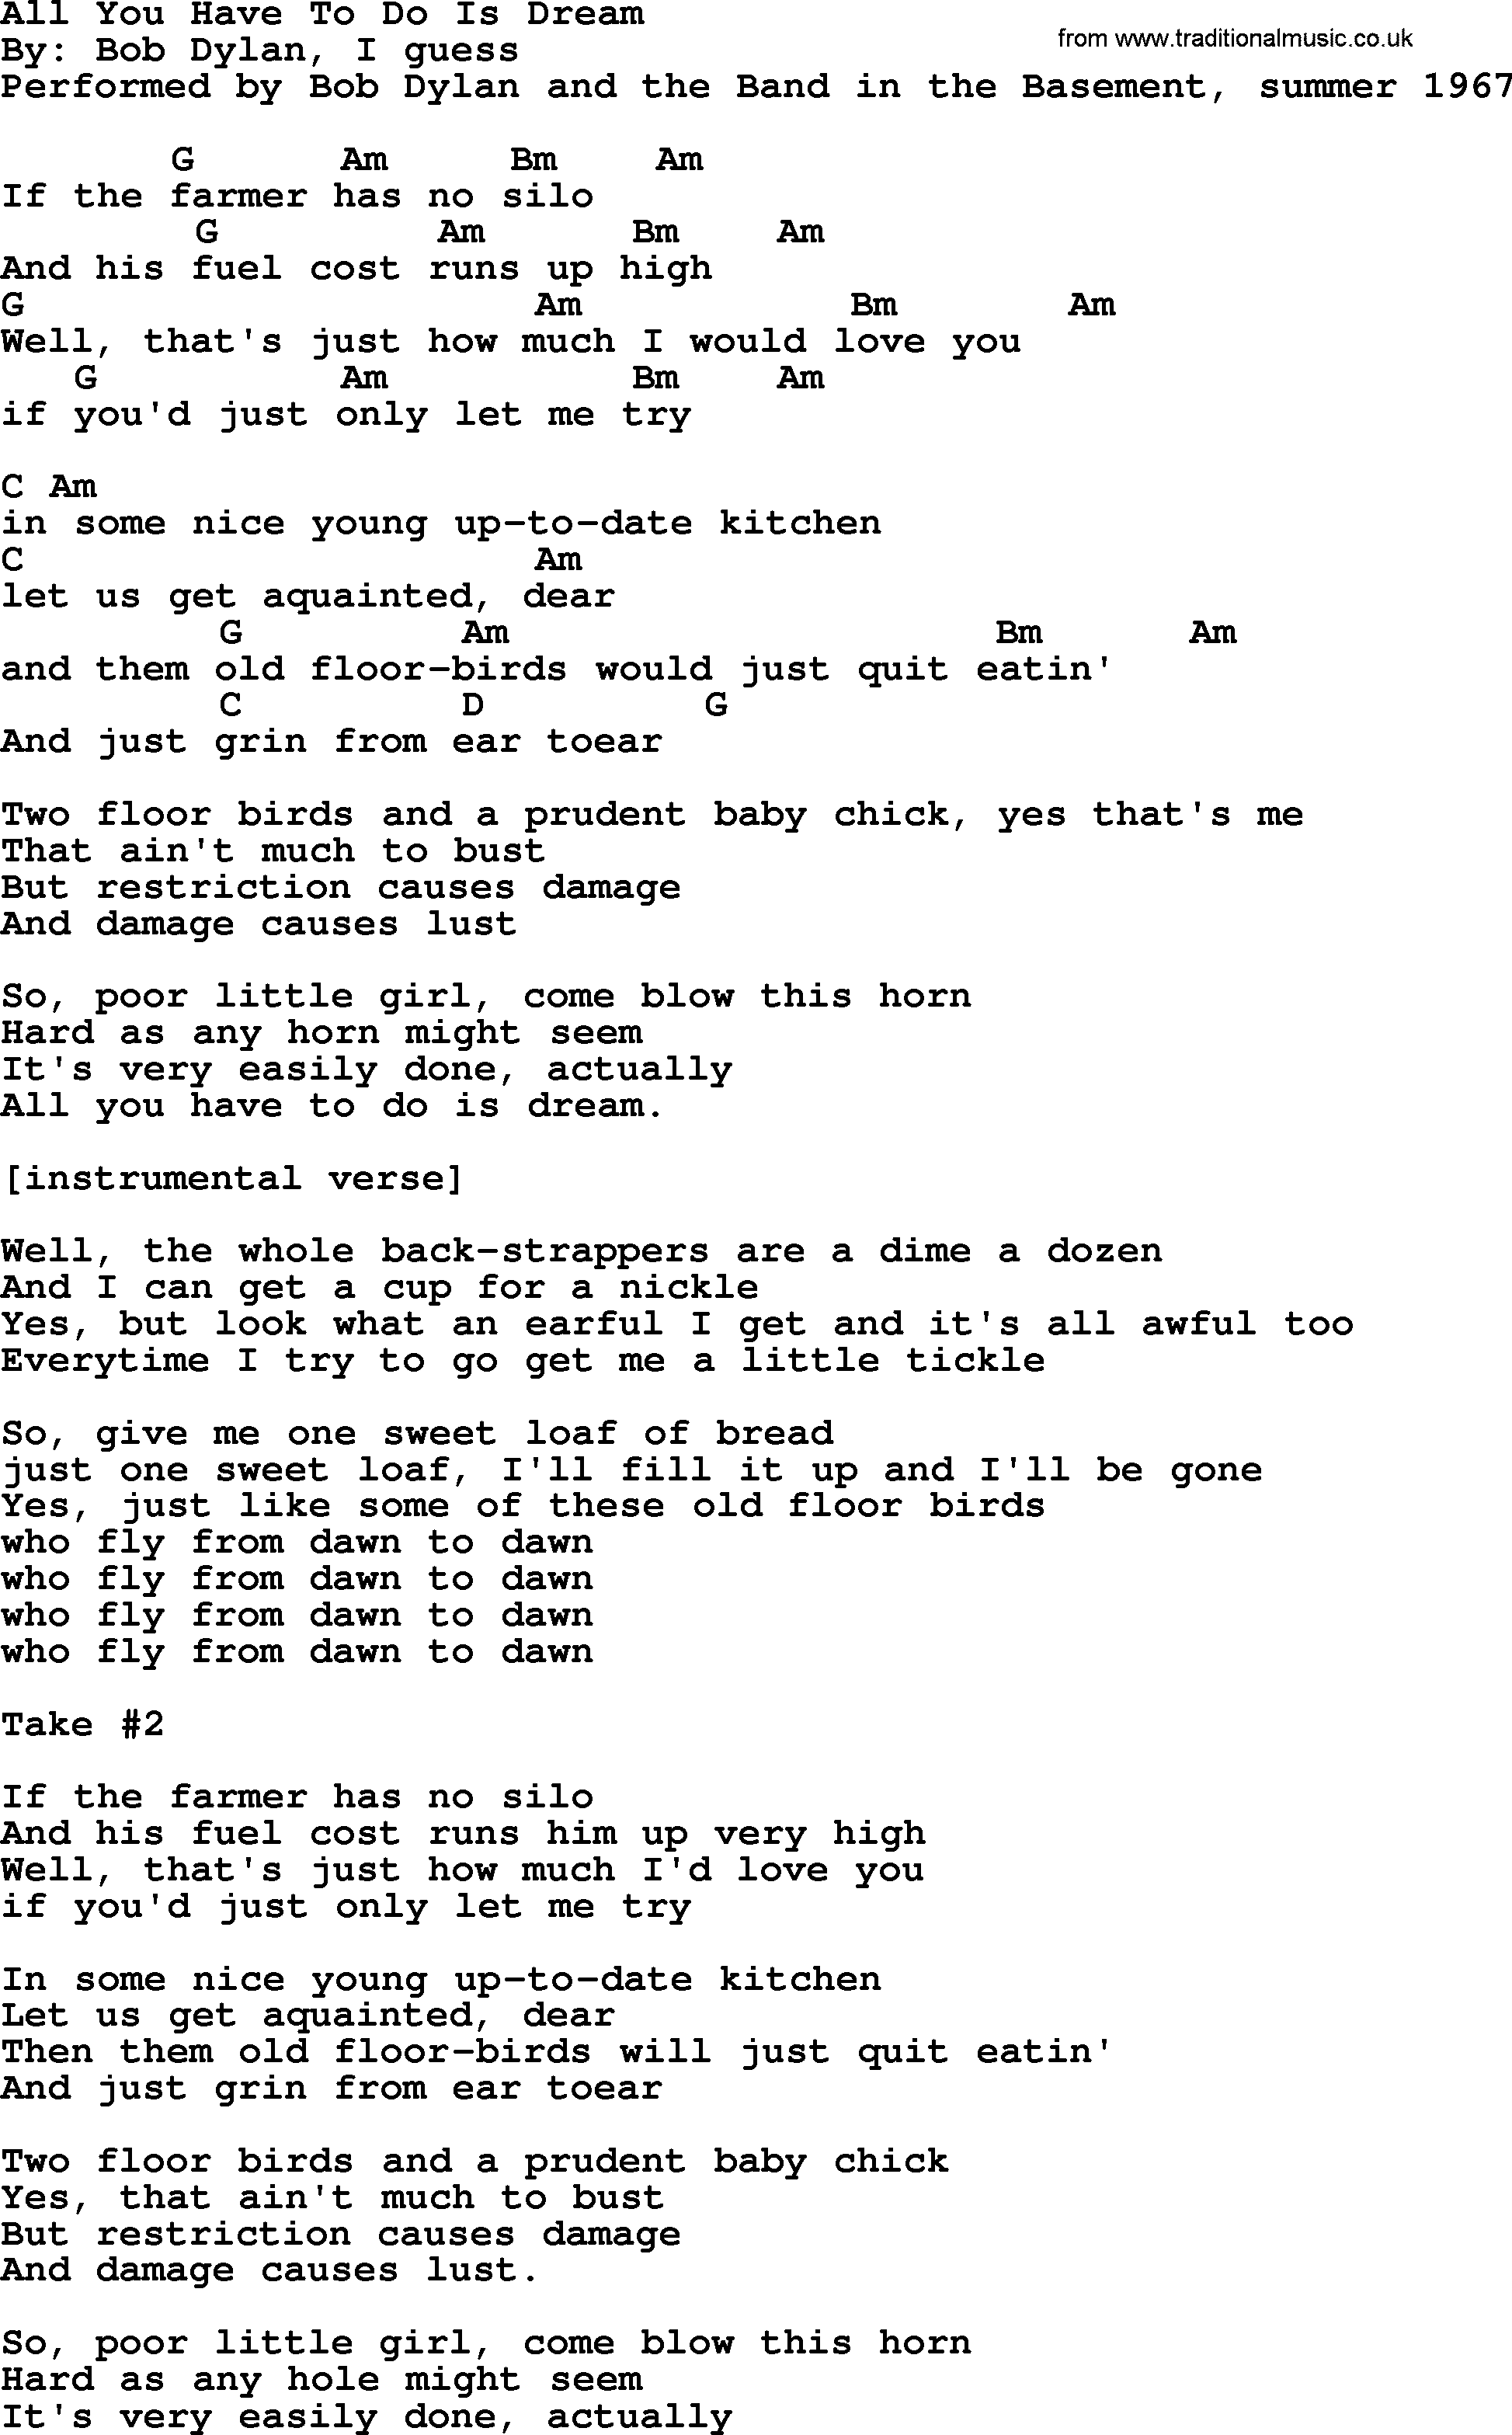 Bob Dylan song, lyrics with chords - All You Have To Do Is Dream